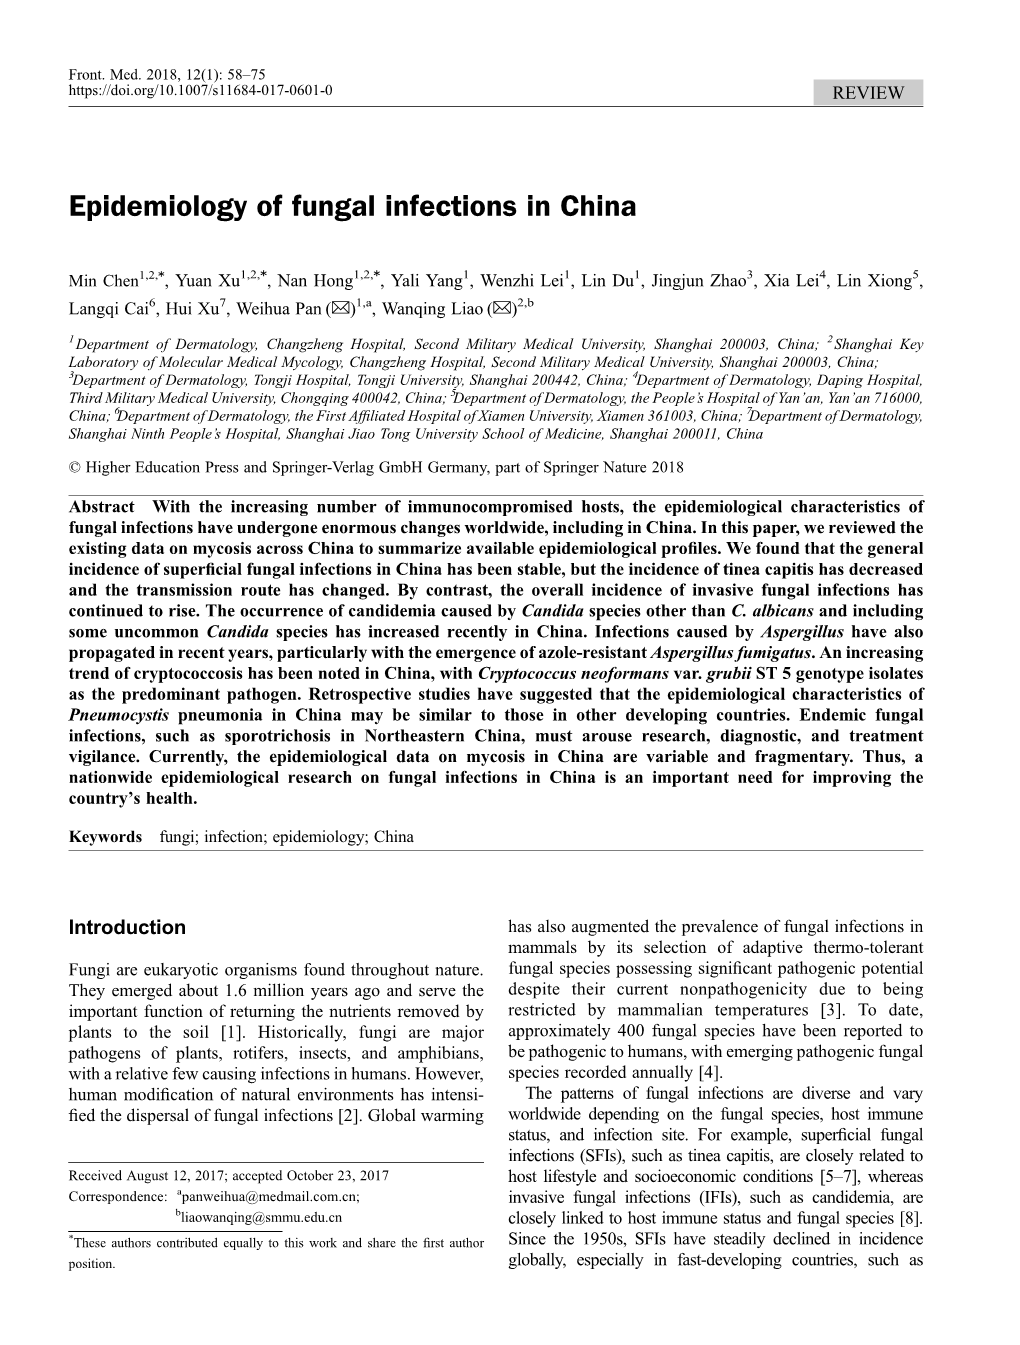 Epidemiology of Fungal Infections in China